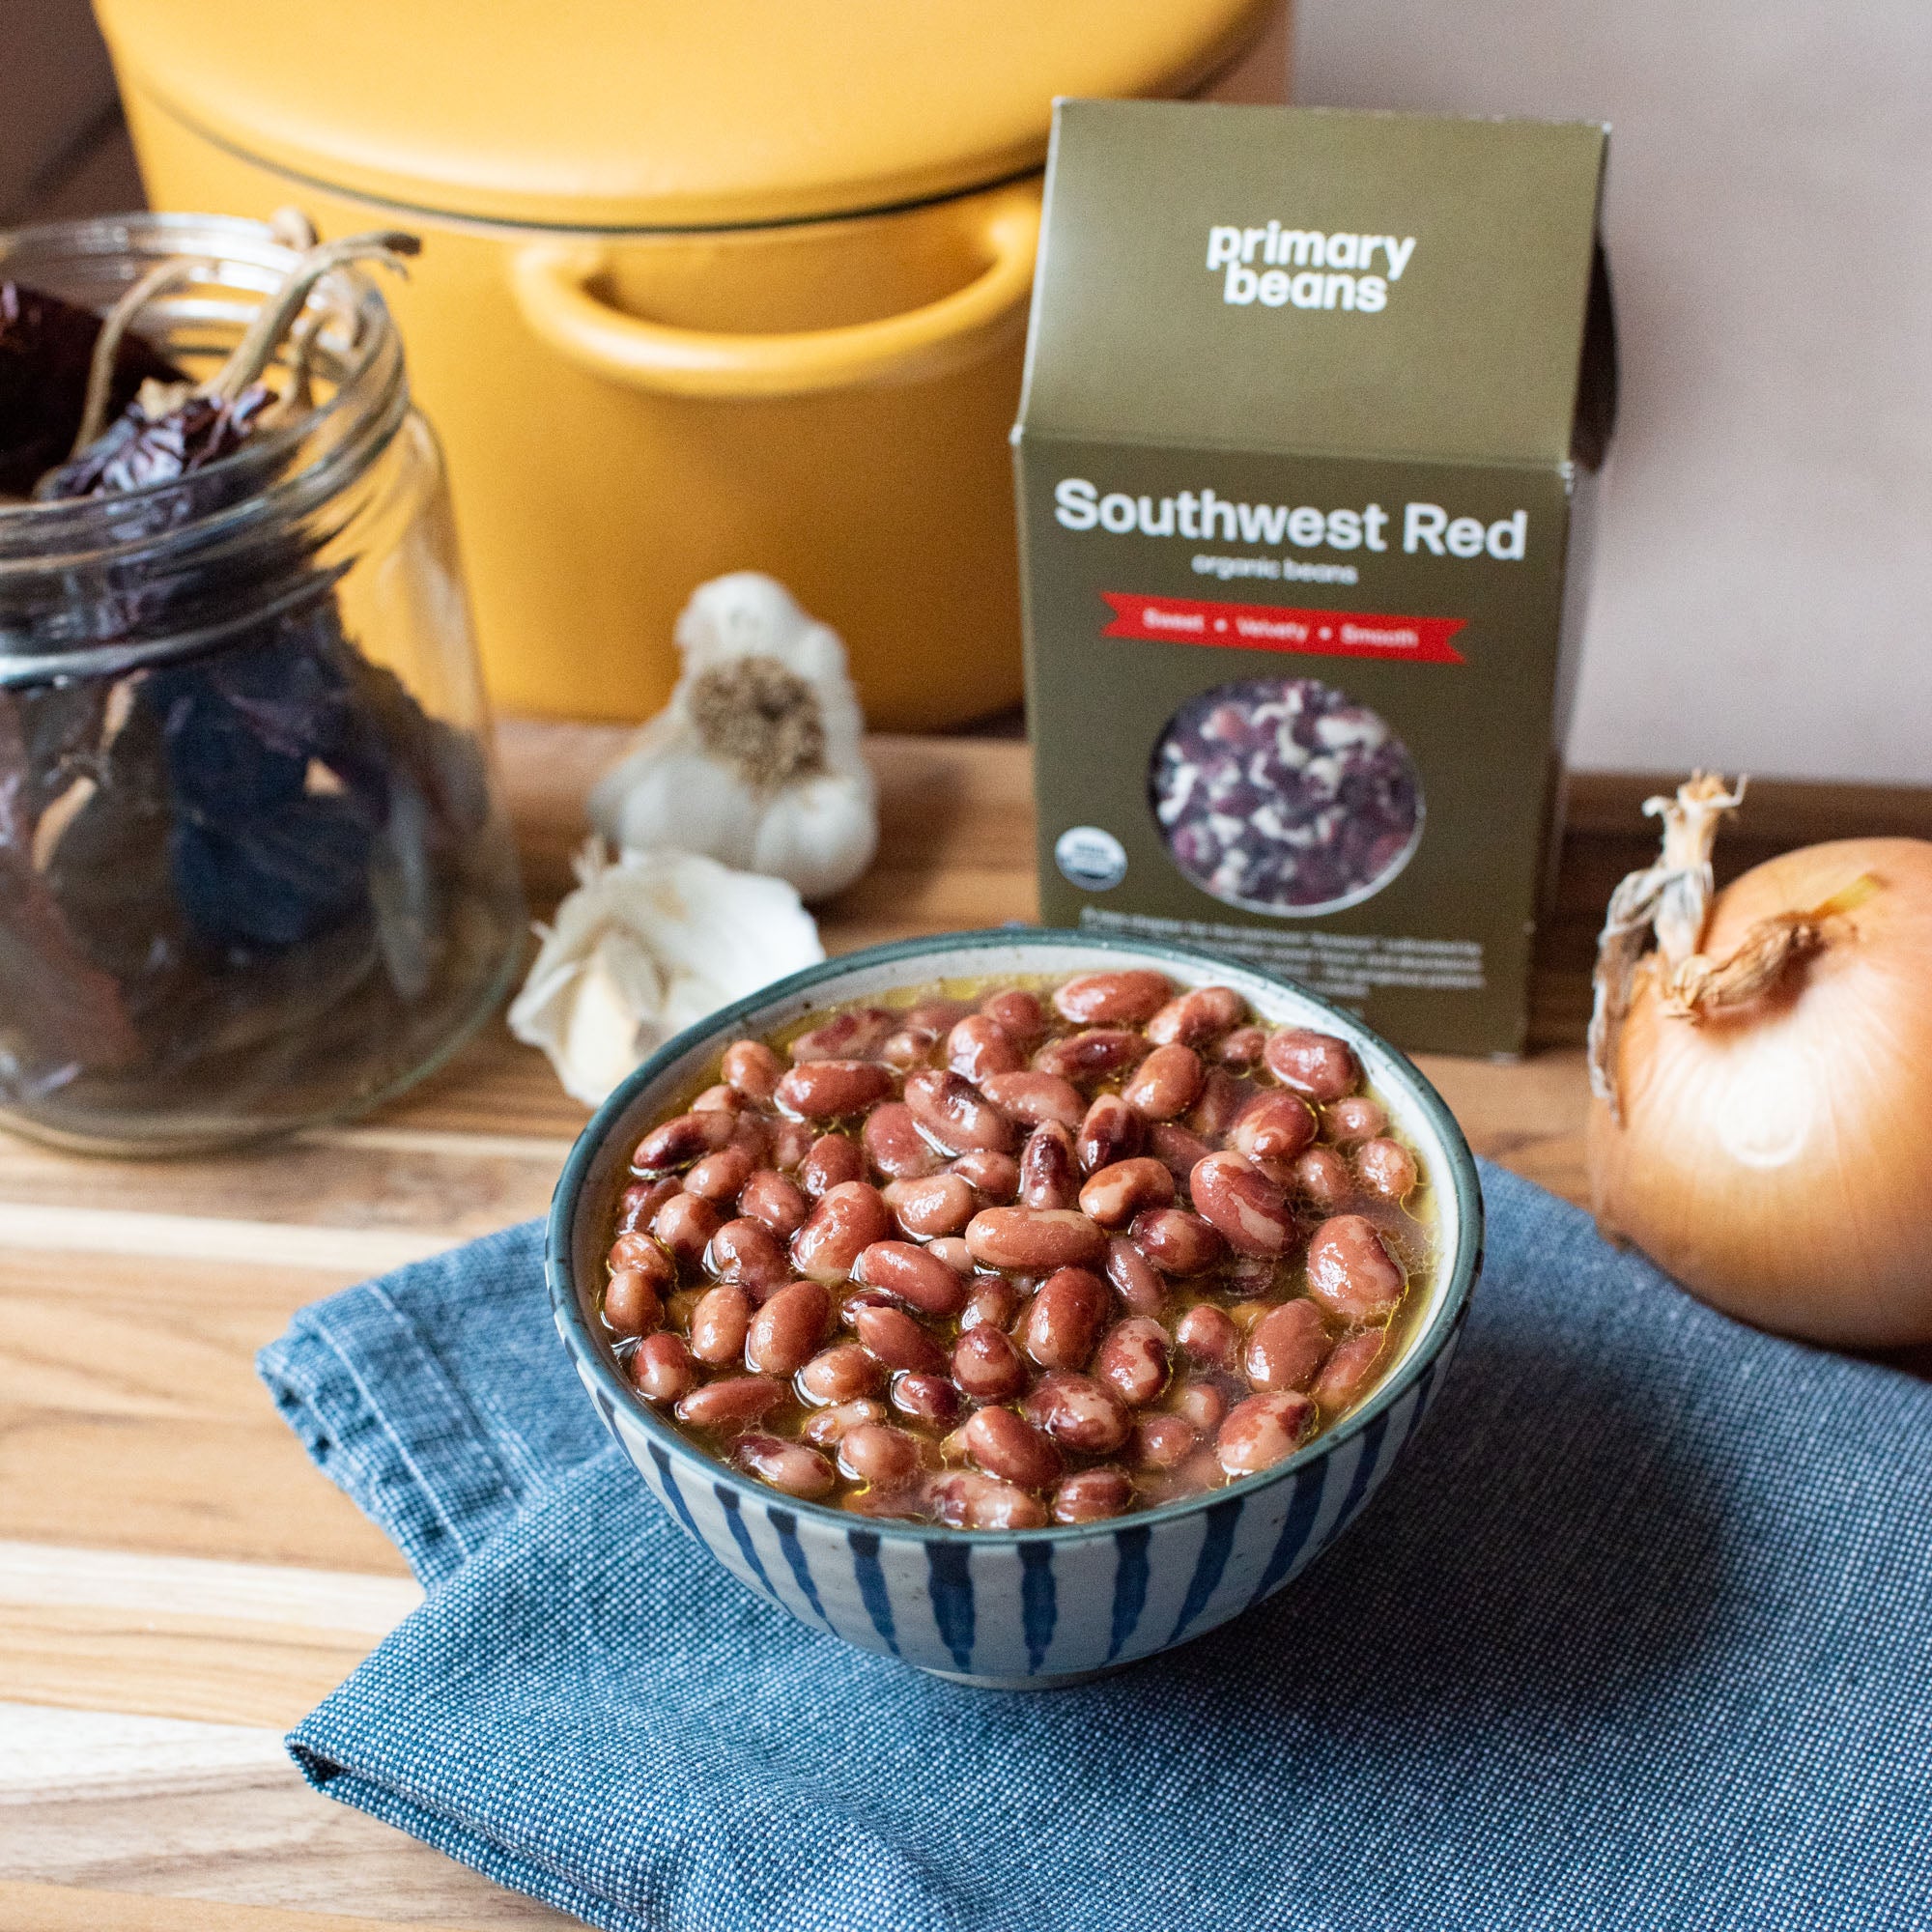 Primary Beans Organic Southwest Red beans brothy counter